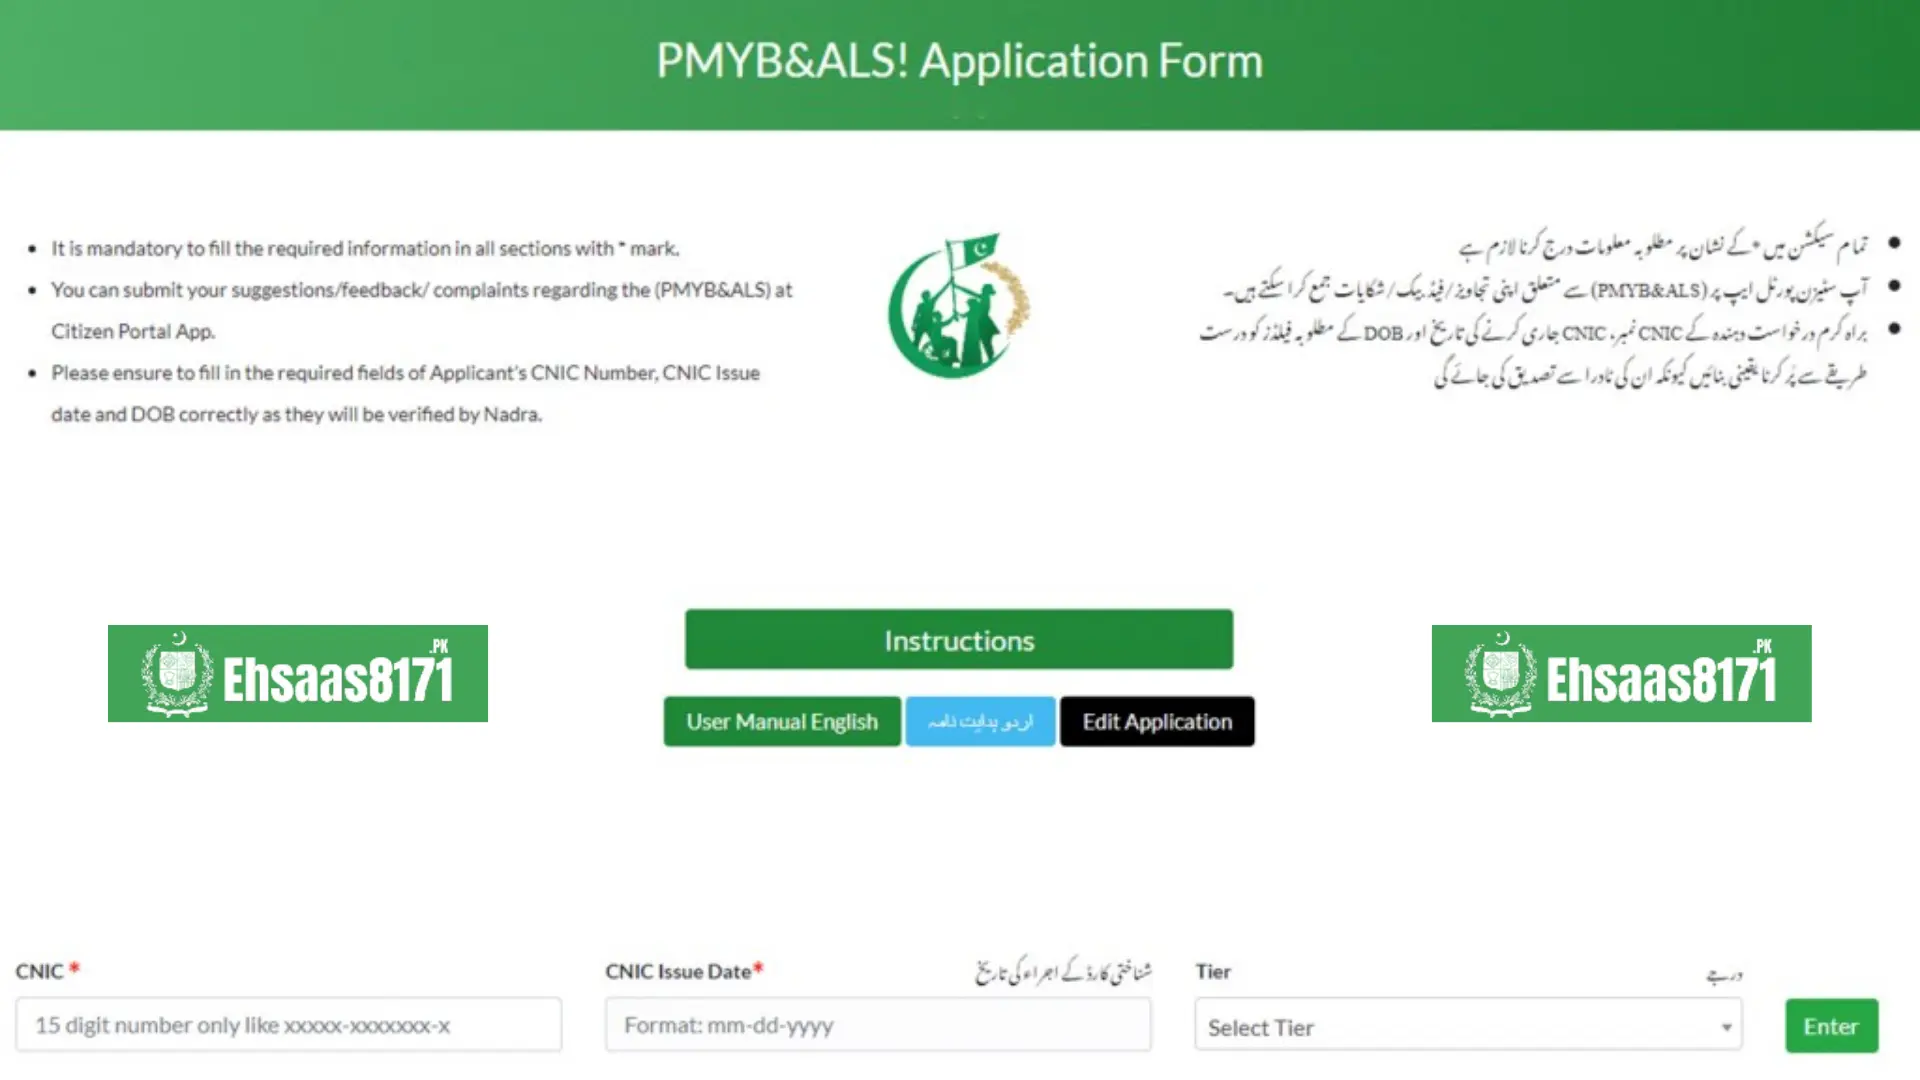 Eligibility Criteria for Applying in PM Youth Loan Scheme